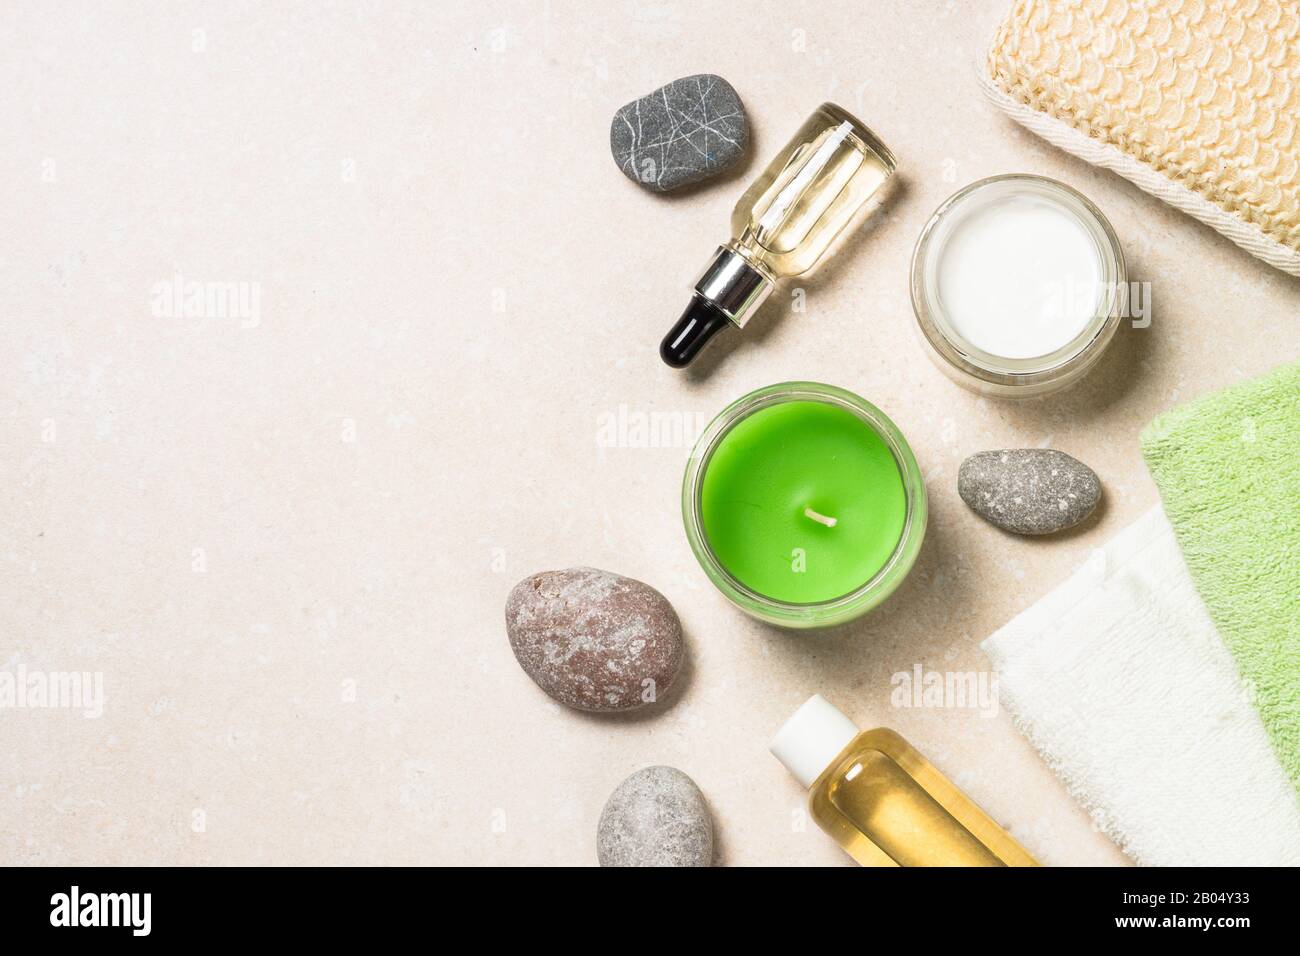 Hyaluronic acid and hyaluronic gel on stone table. Stock Photo